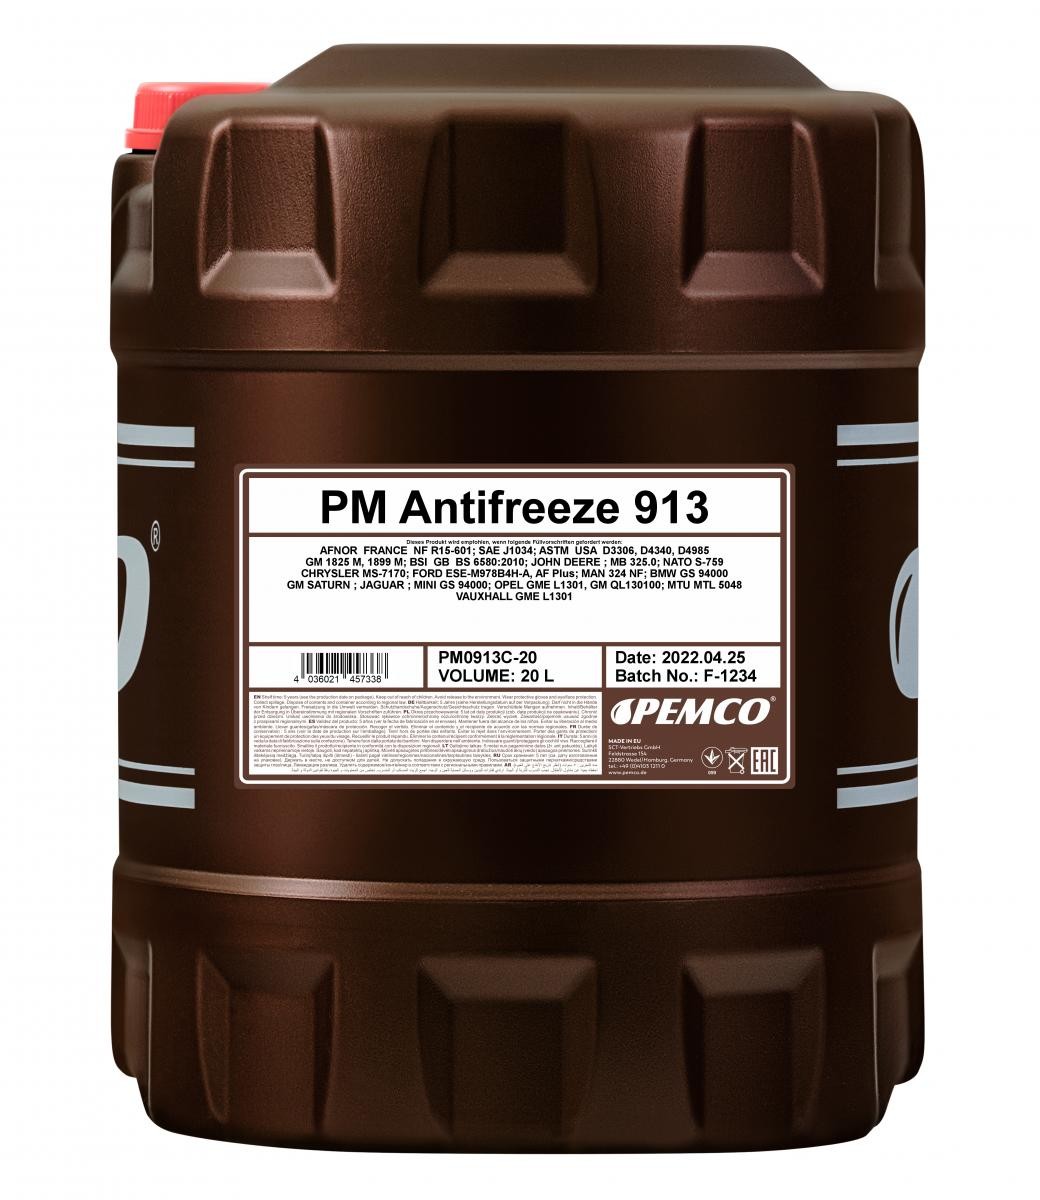 PEMCO Antifreeze 913, Concentrate PM0913C-20 Antifreeze G11 green, 20l, -38(50/50)